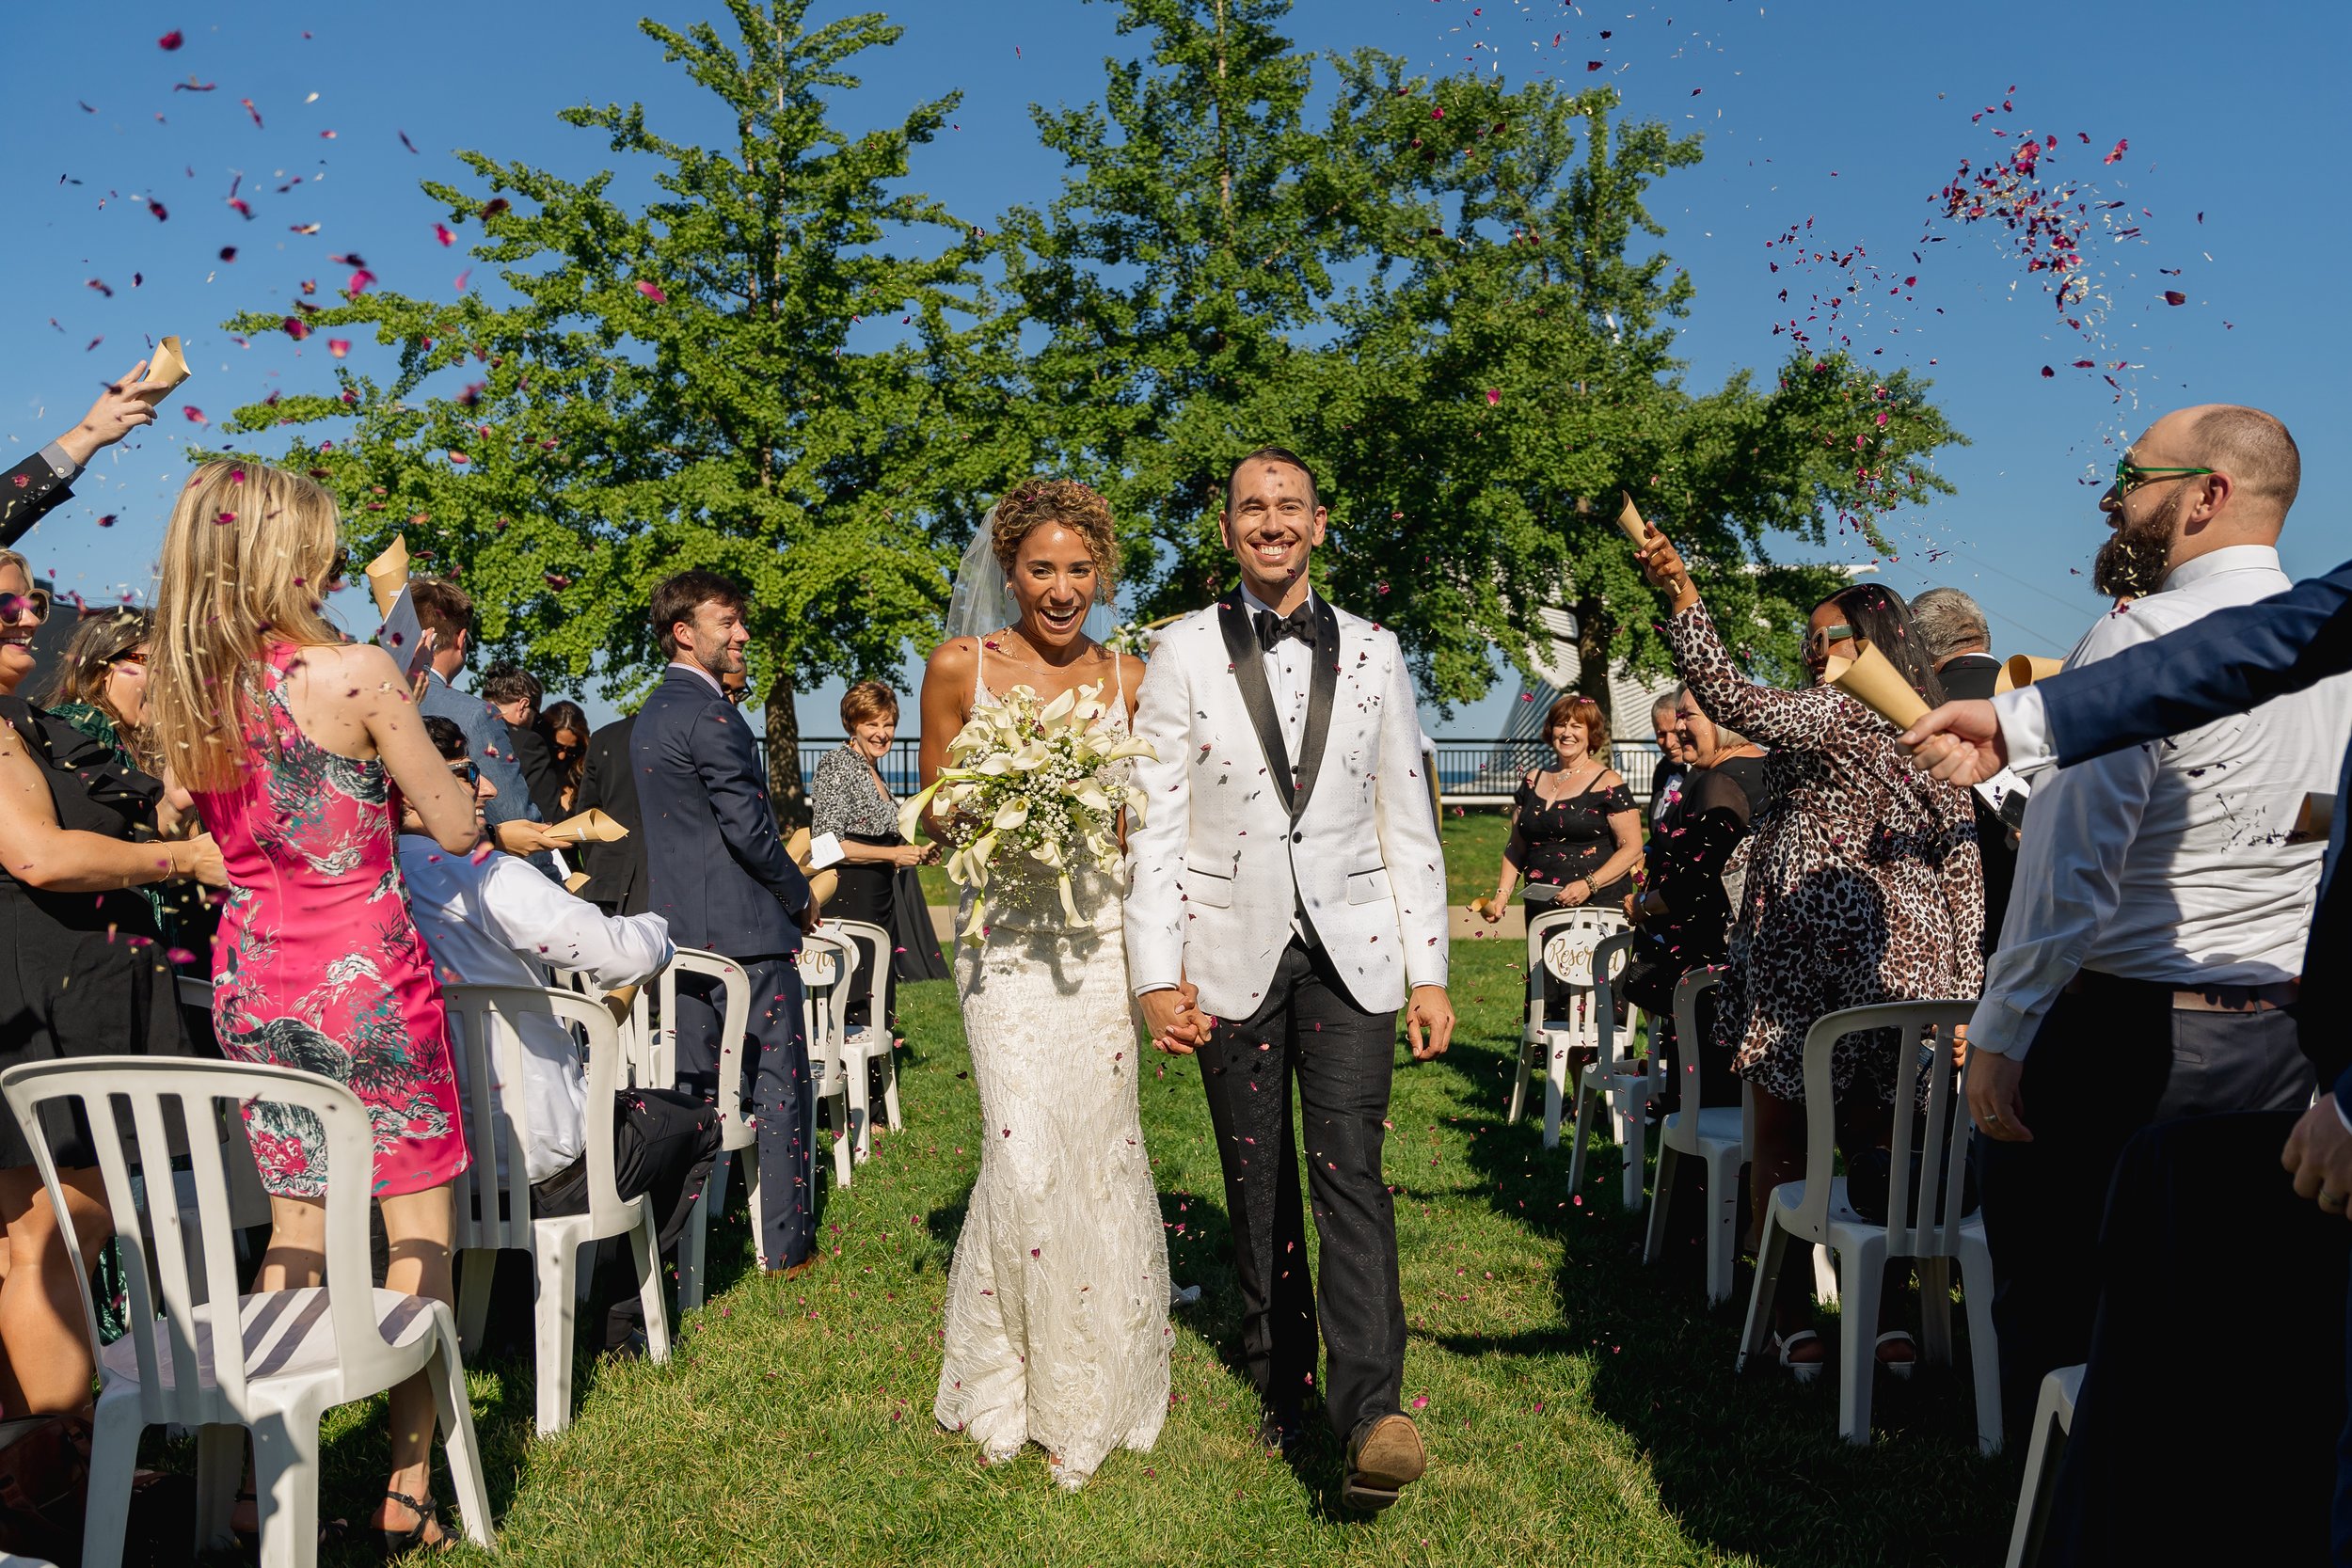 Couple walks down the aisle together while guests throw flower petals